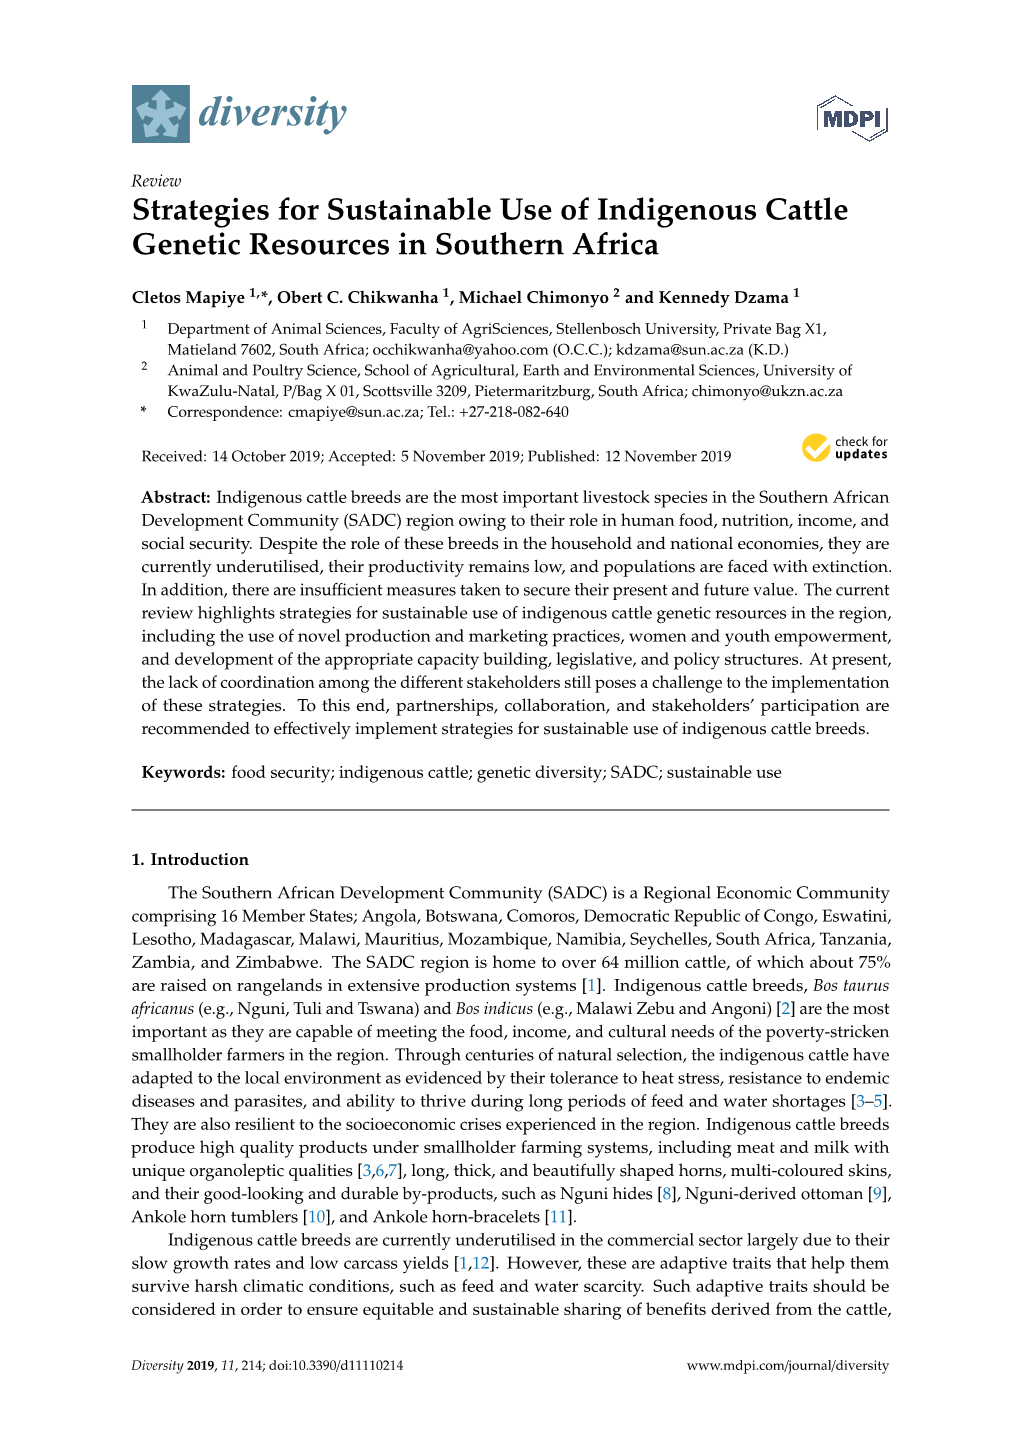 Strategies for Sustainable Use of Indigenous Cattle Genetic Resources in Southern Africa